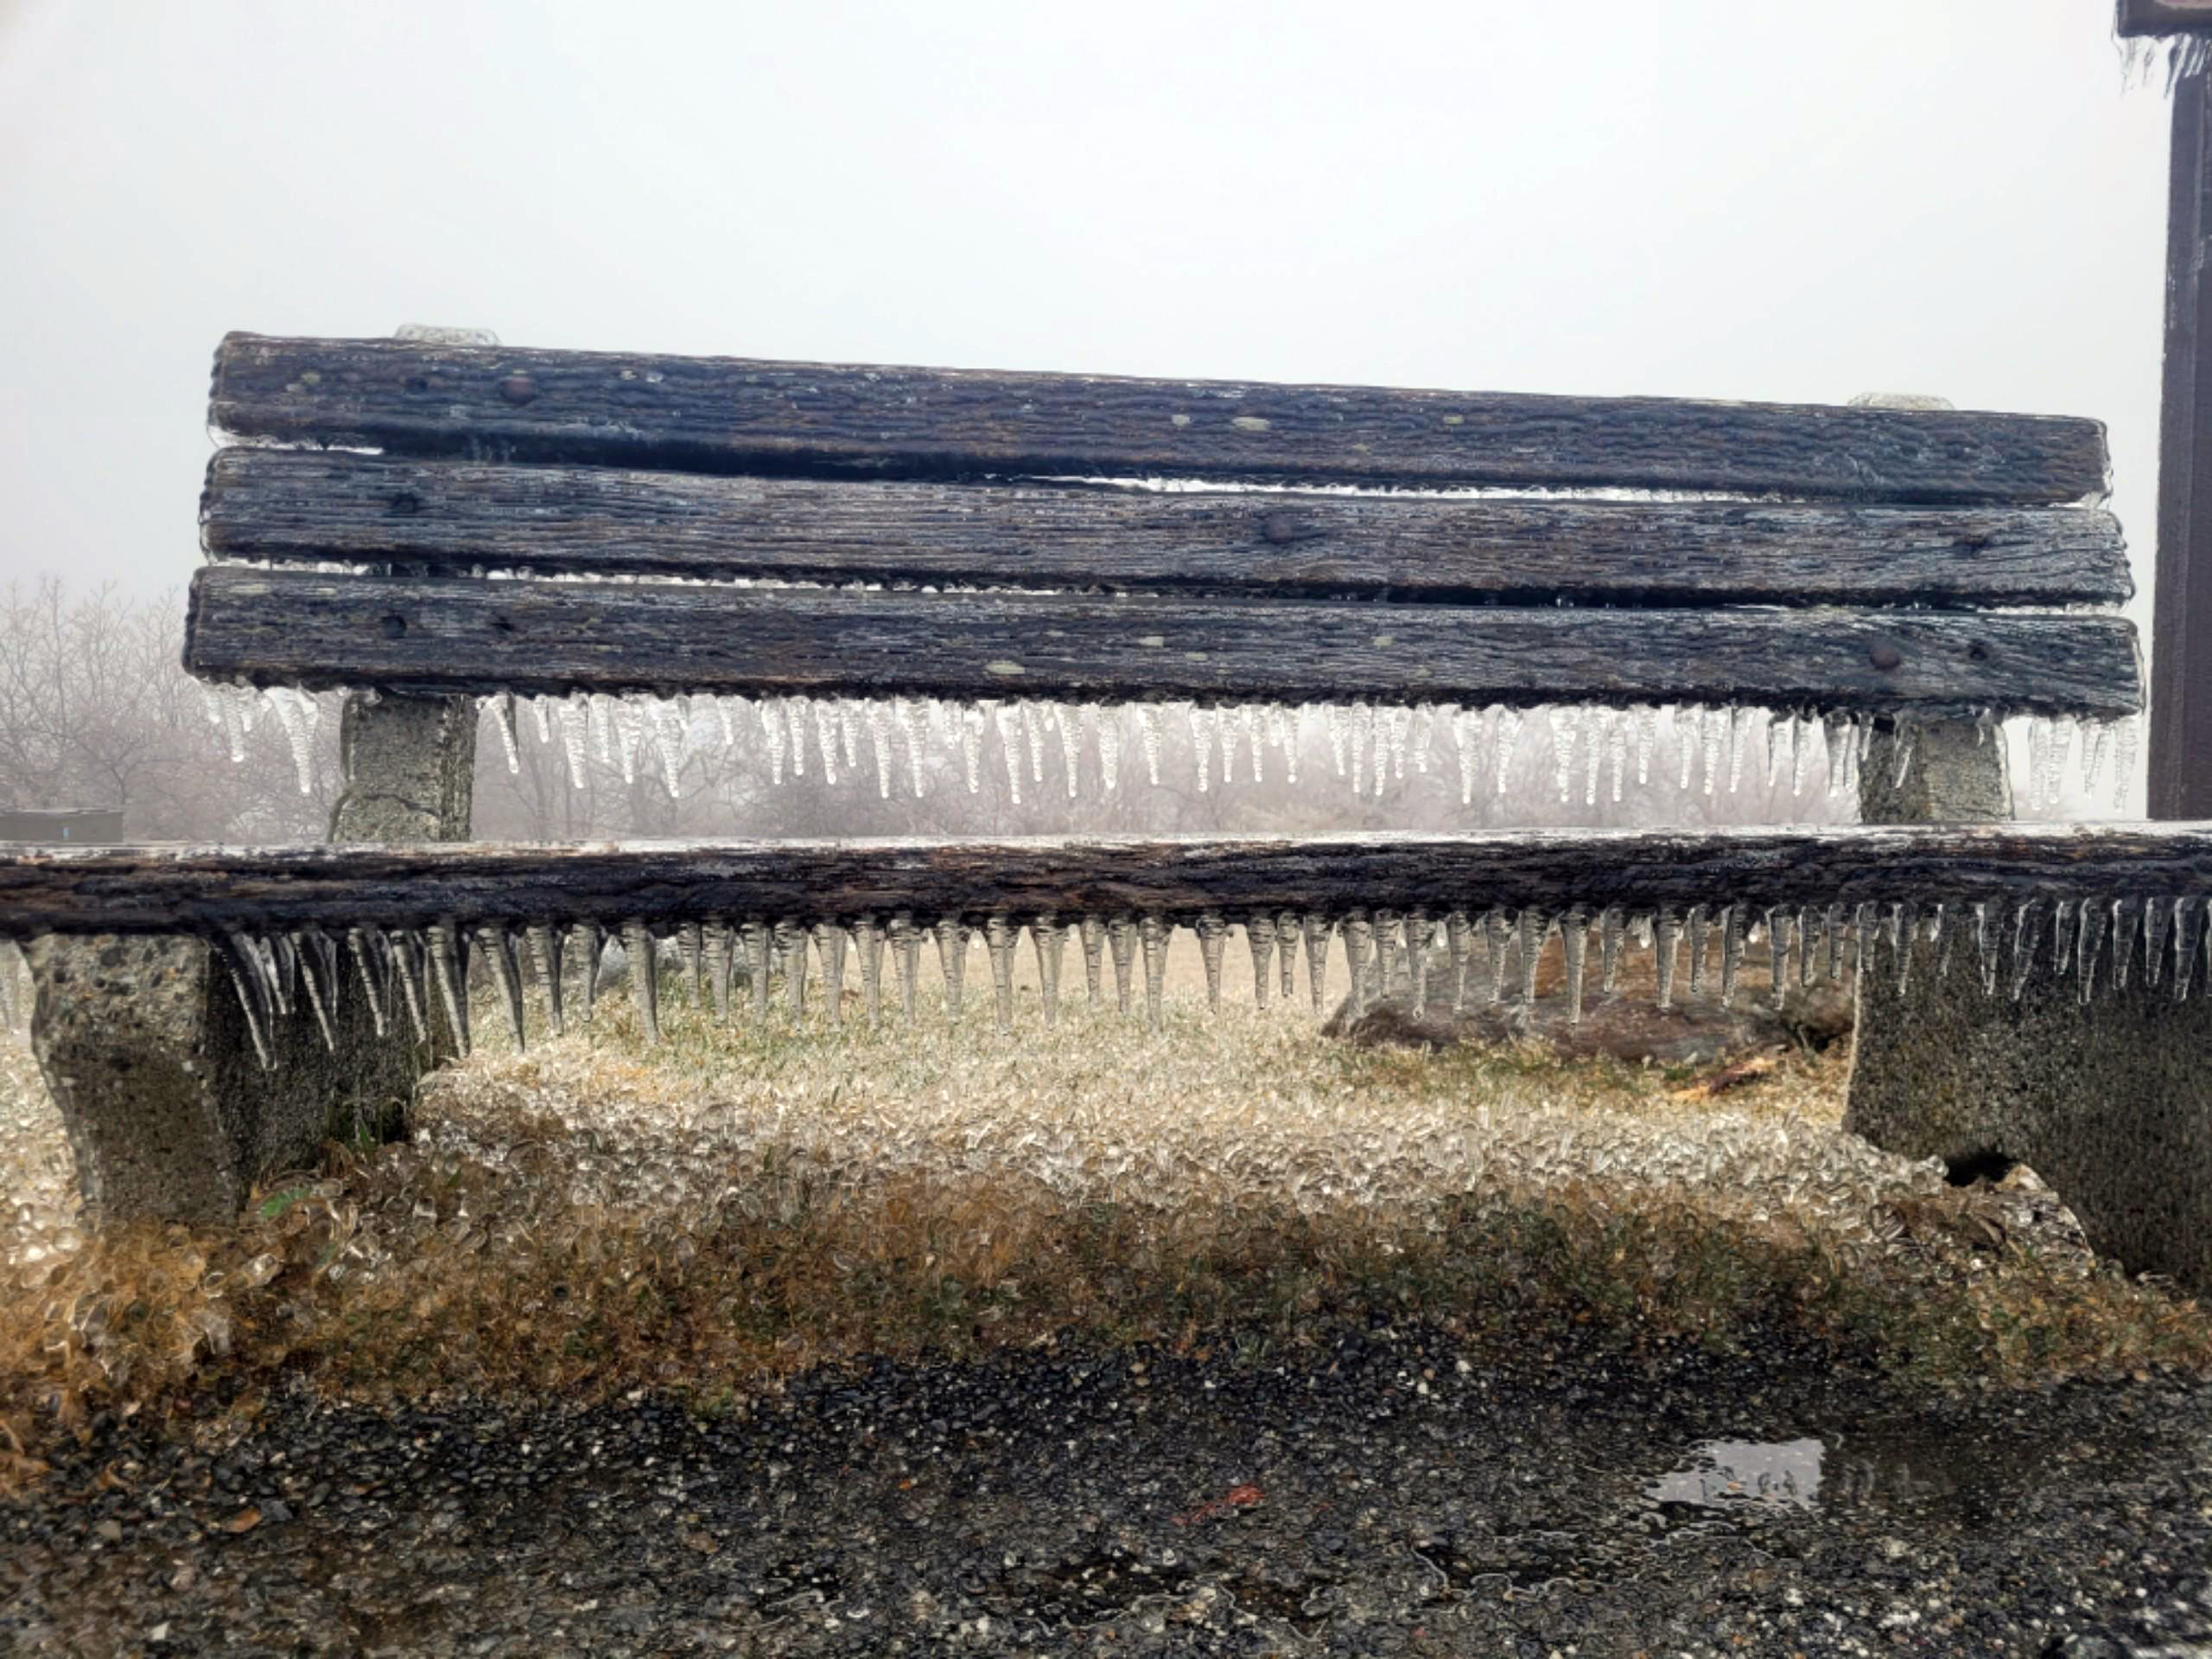 Freezing rain accumulation at High Point State Park on March 24th.